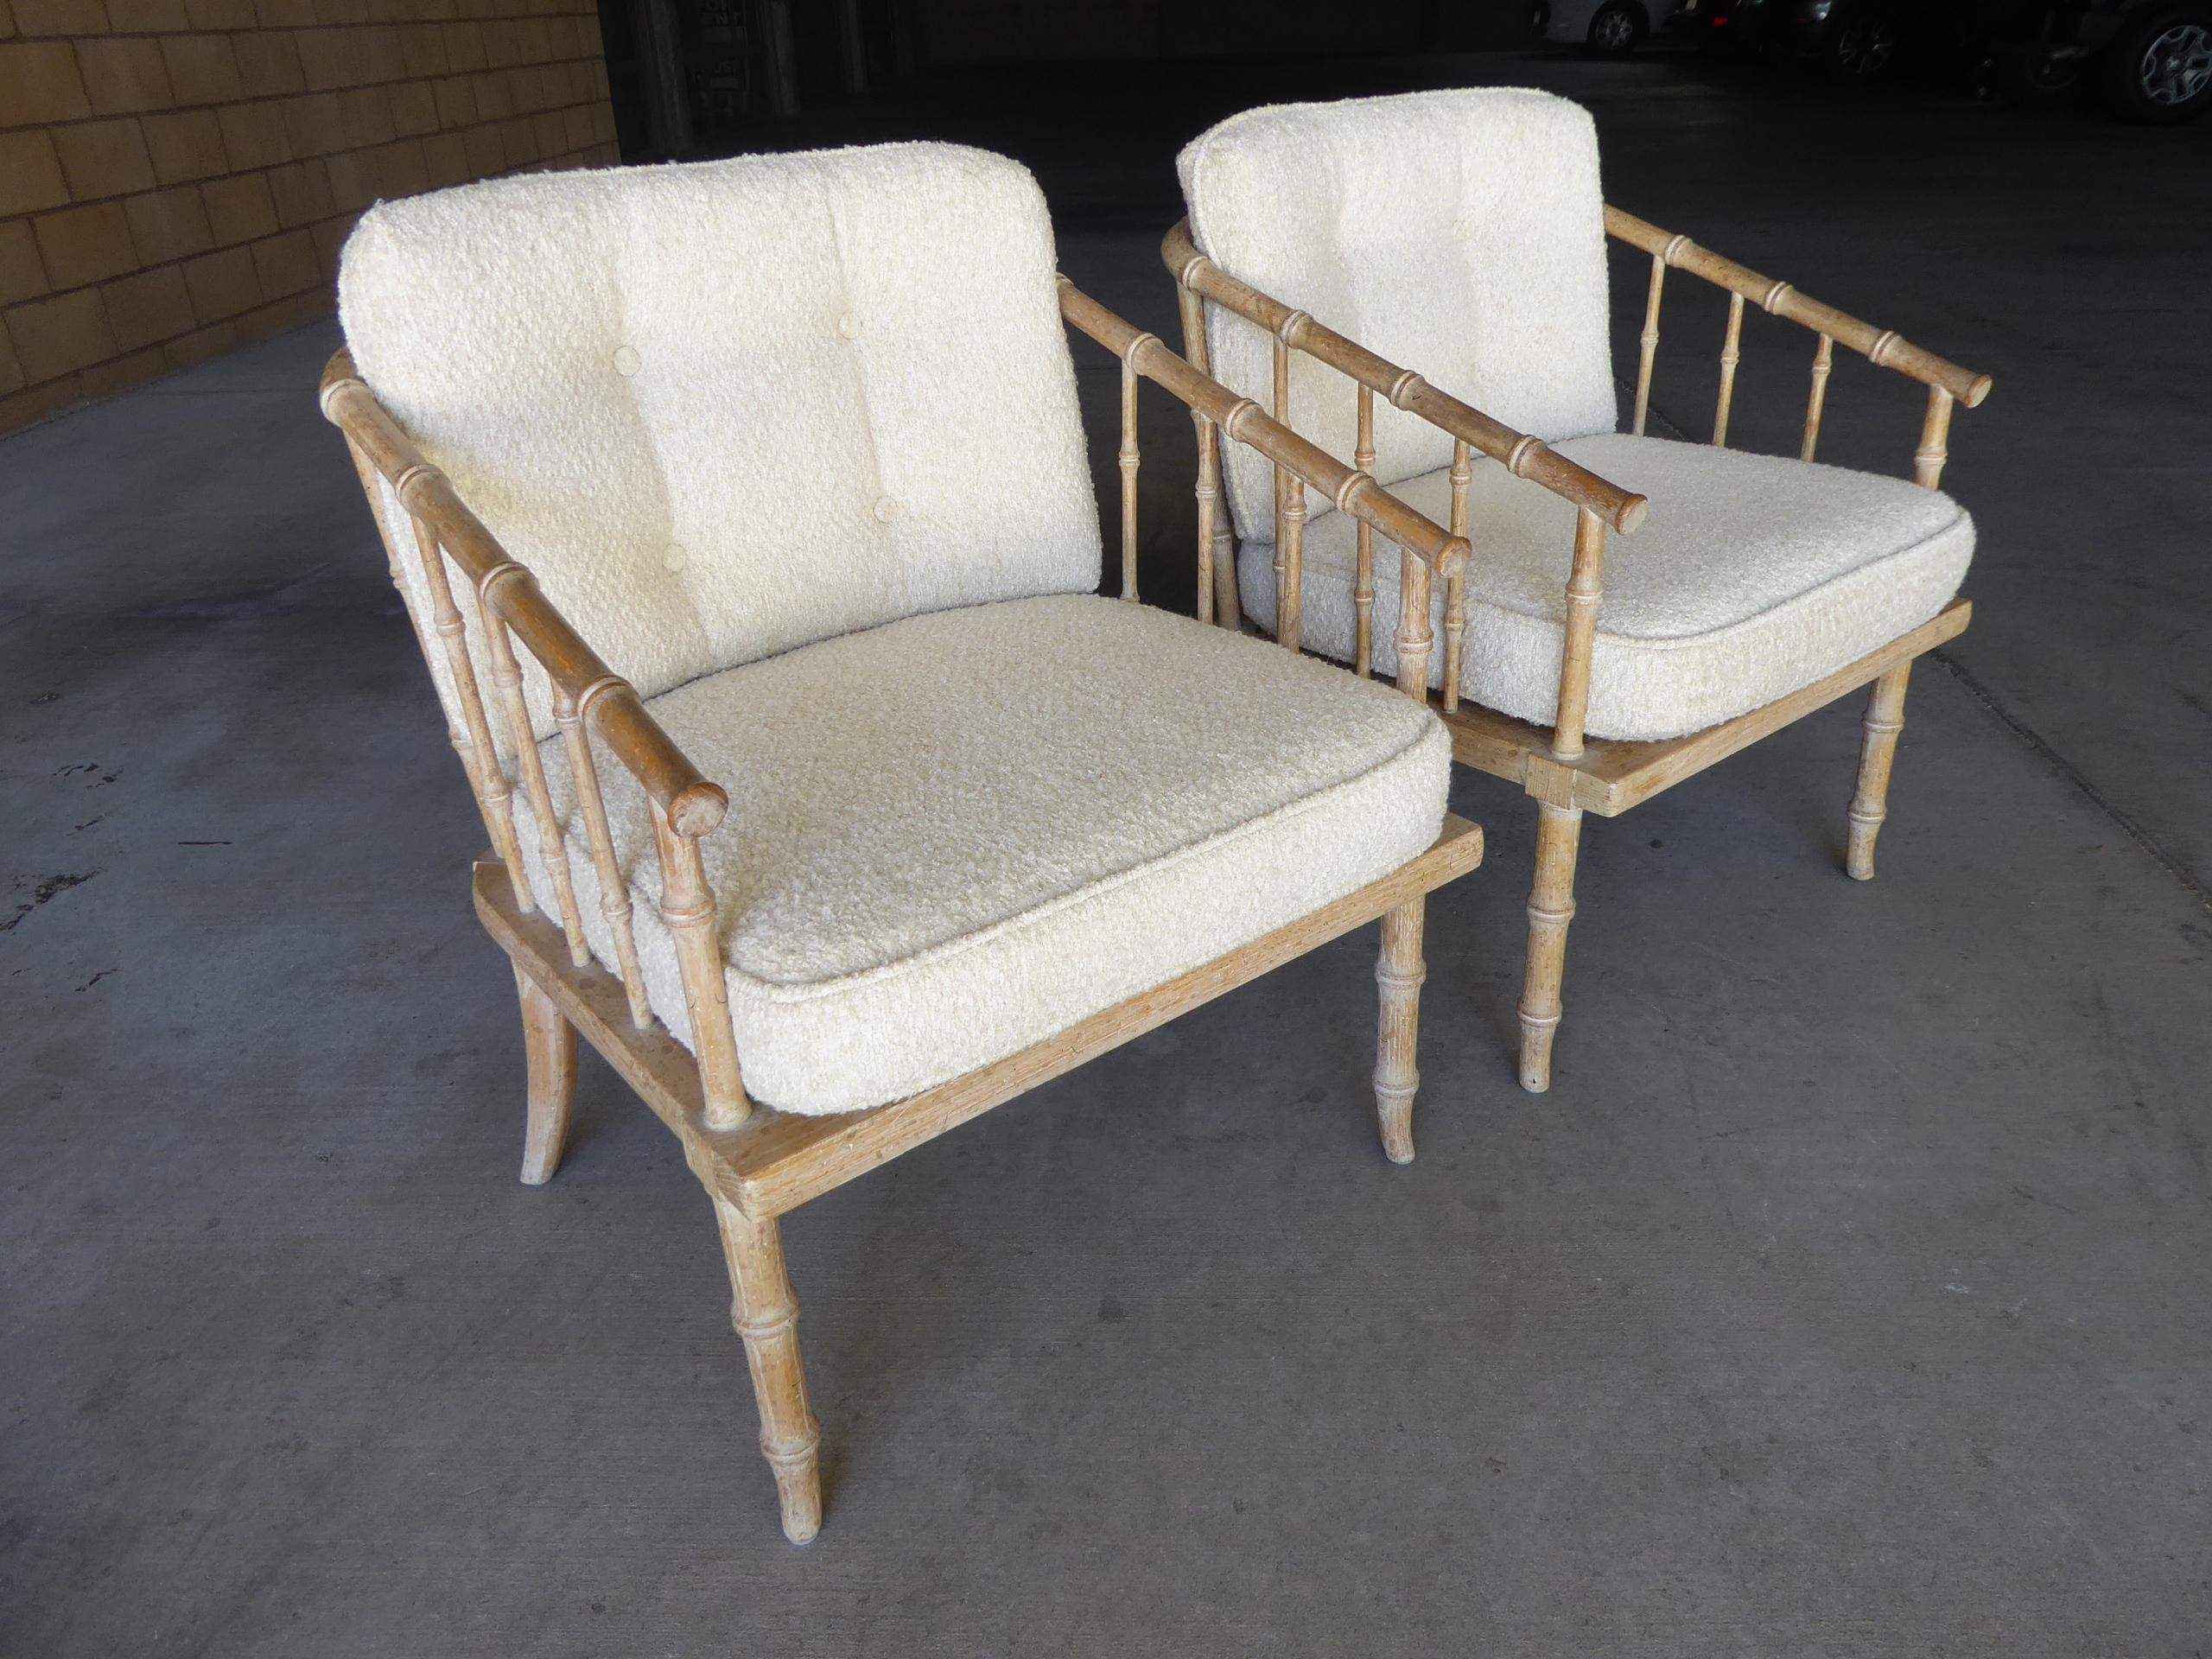 Hollywood Regency Pair of Faux-Bamboo Armchairs Attributed to McGuire